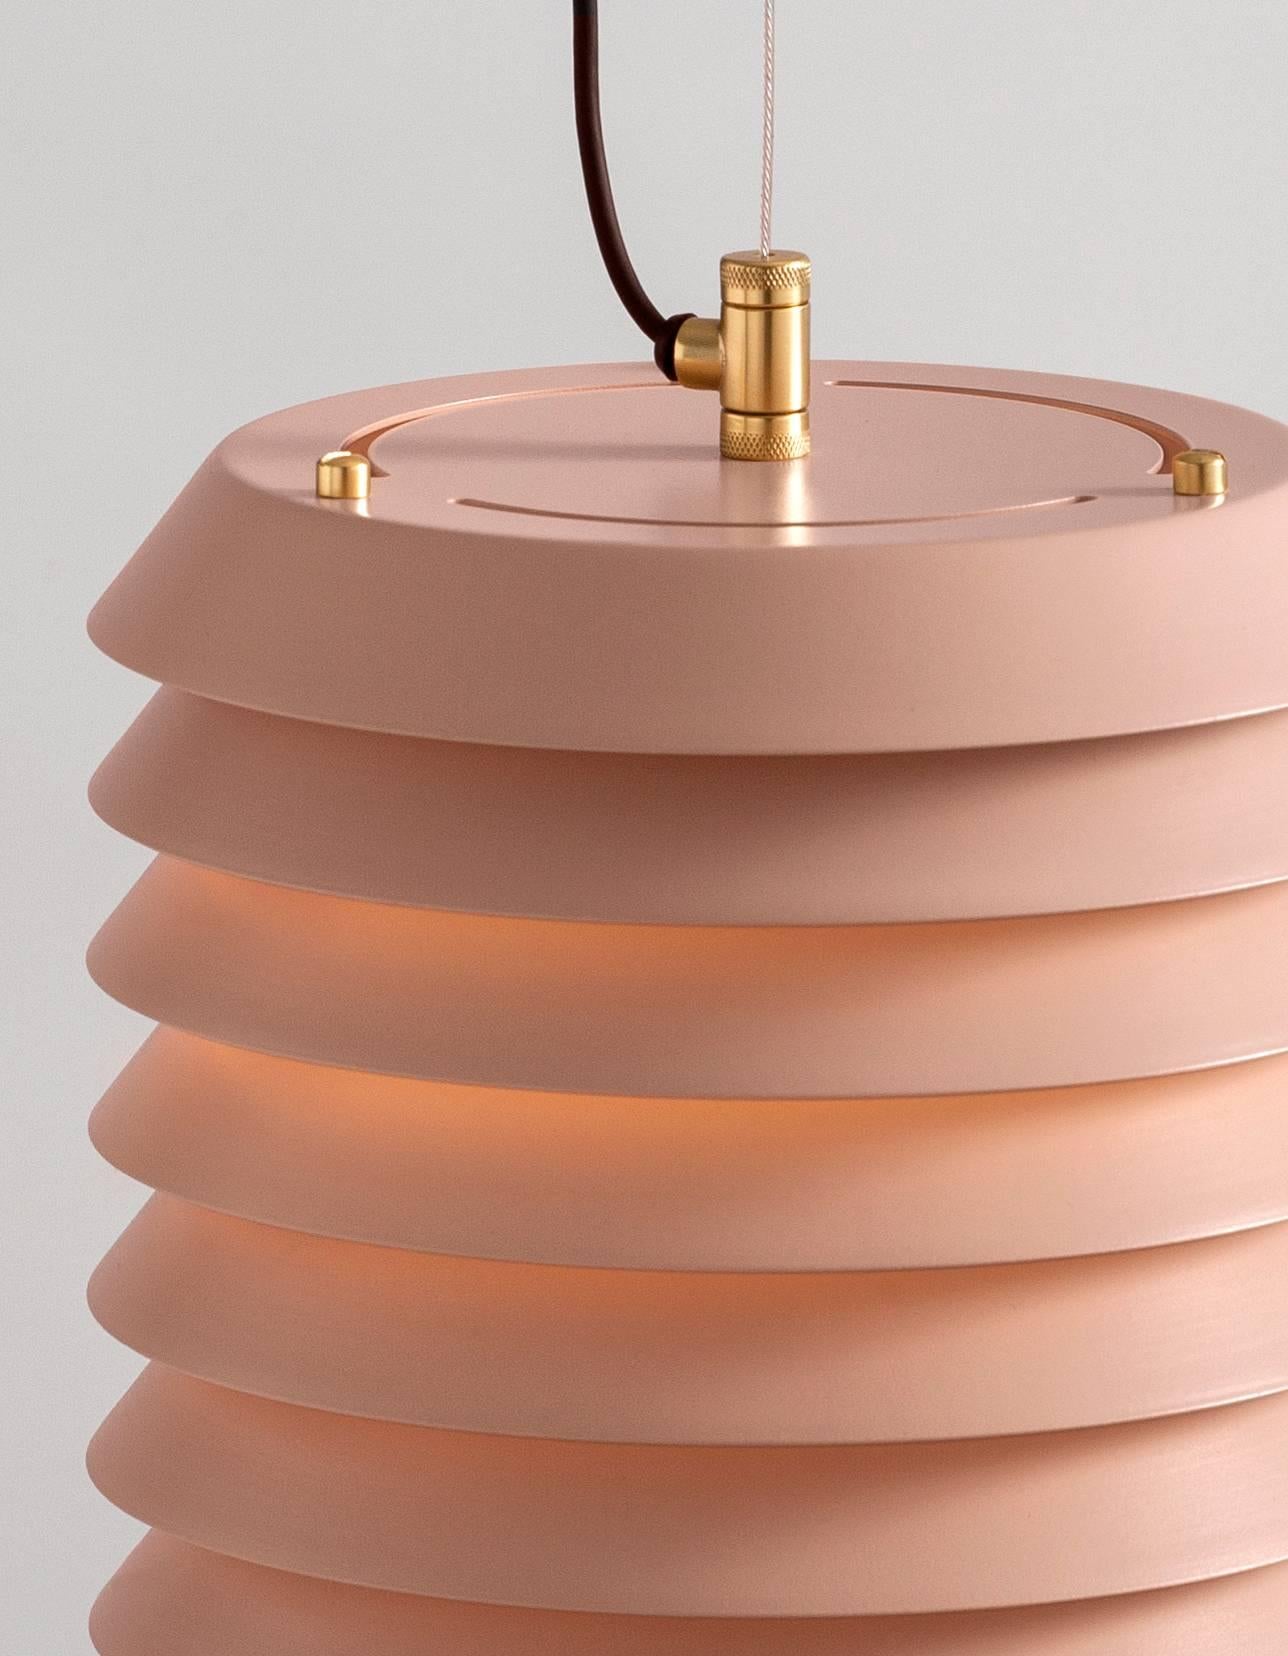 Maija 30 pendant by Ilmari Tapiovaara for Santa & Cole originally designed in Spain, 1955. Diffuser in white translucent glass. Nude/rose re-edtion. Wired for US junction boxes. circular canopy included. Suitable for dimming systems 1-10V.